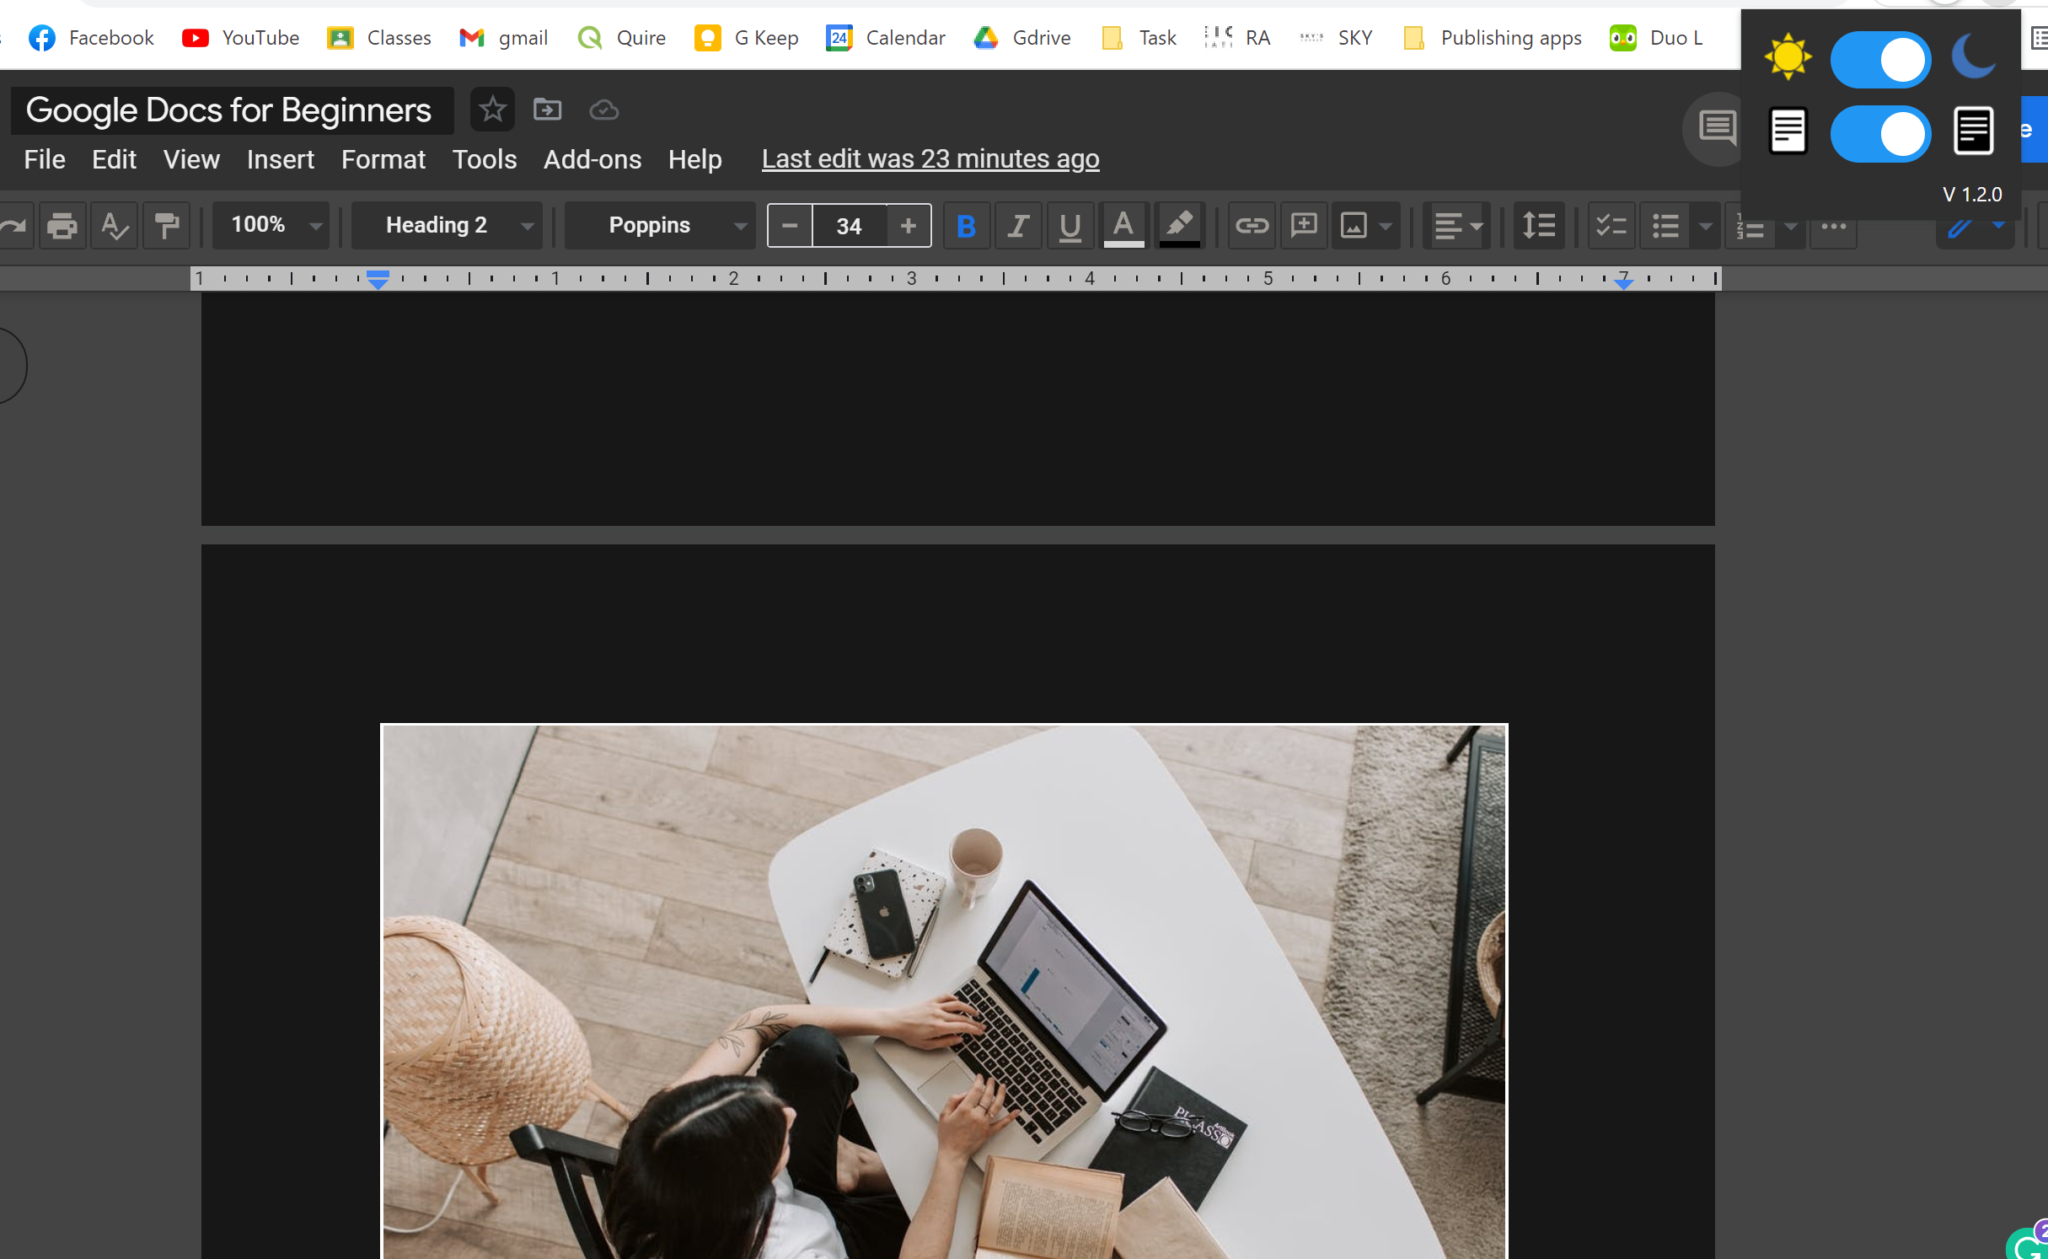 How to enable dark mode on Google docs